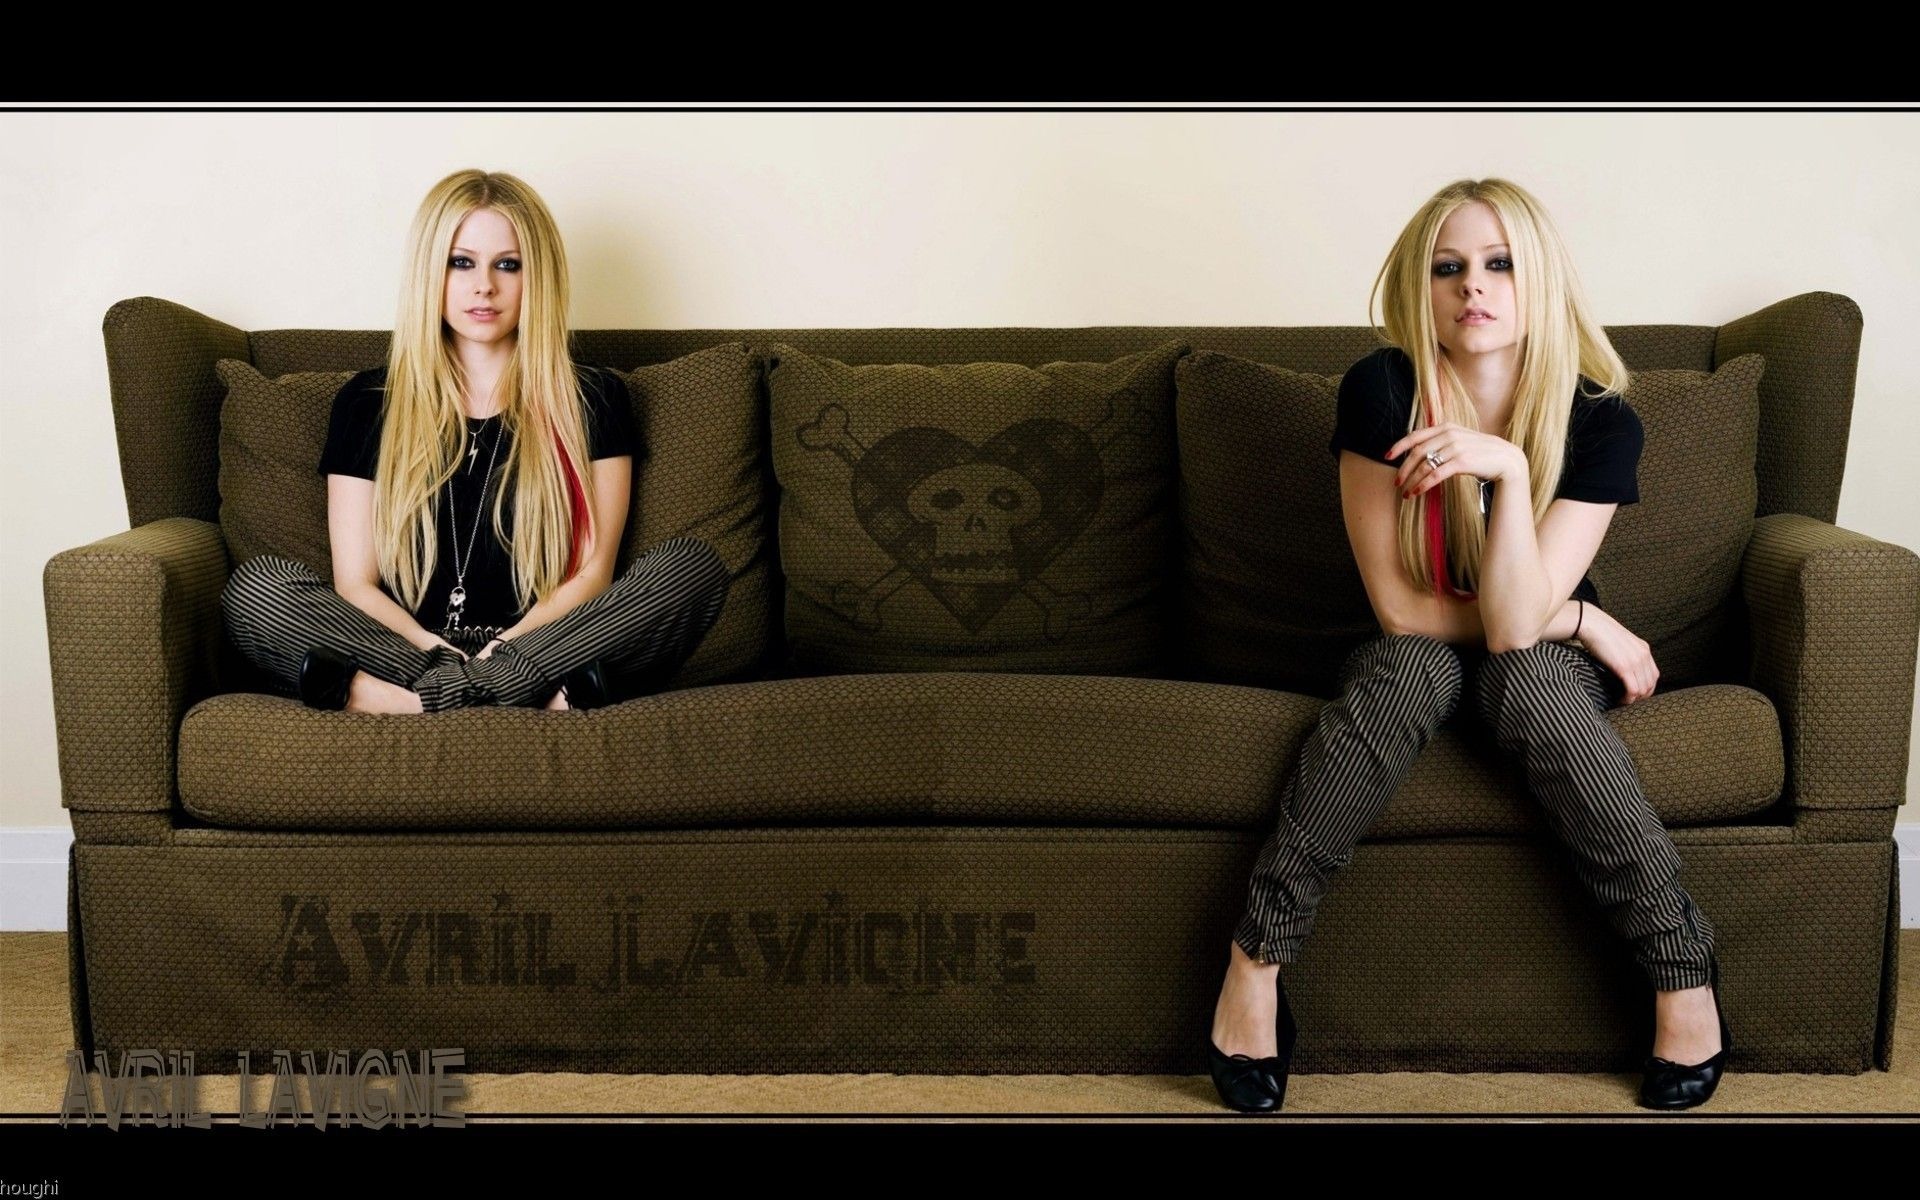 Avril Lavigne #078 - 1920x1200 Wallpapers Pictures Photos Images